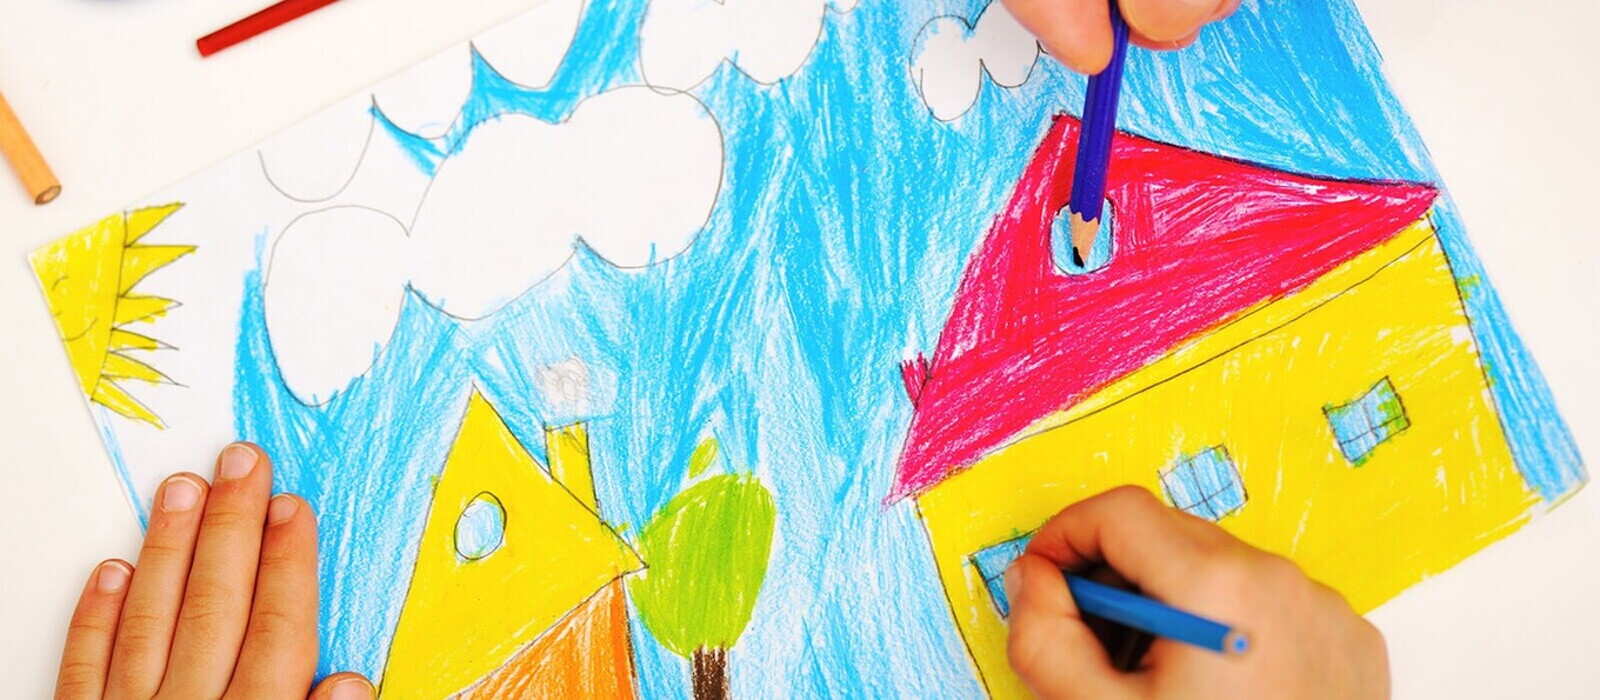 Family Portraits: Understanding Your Child’s Drawings